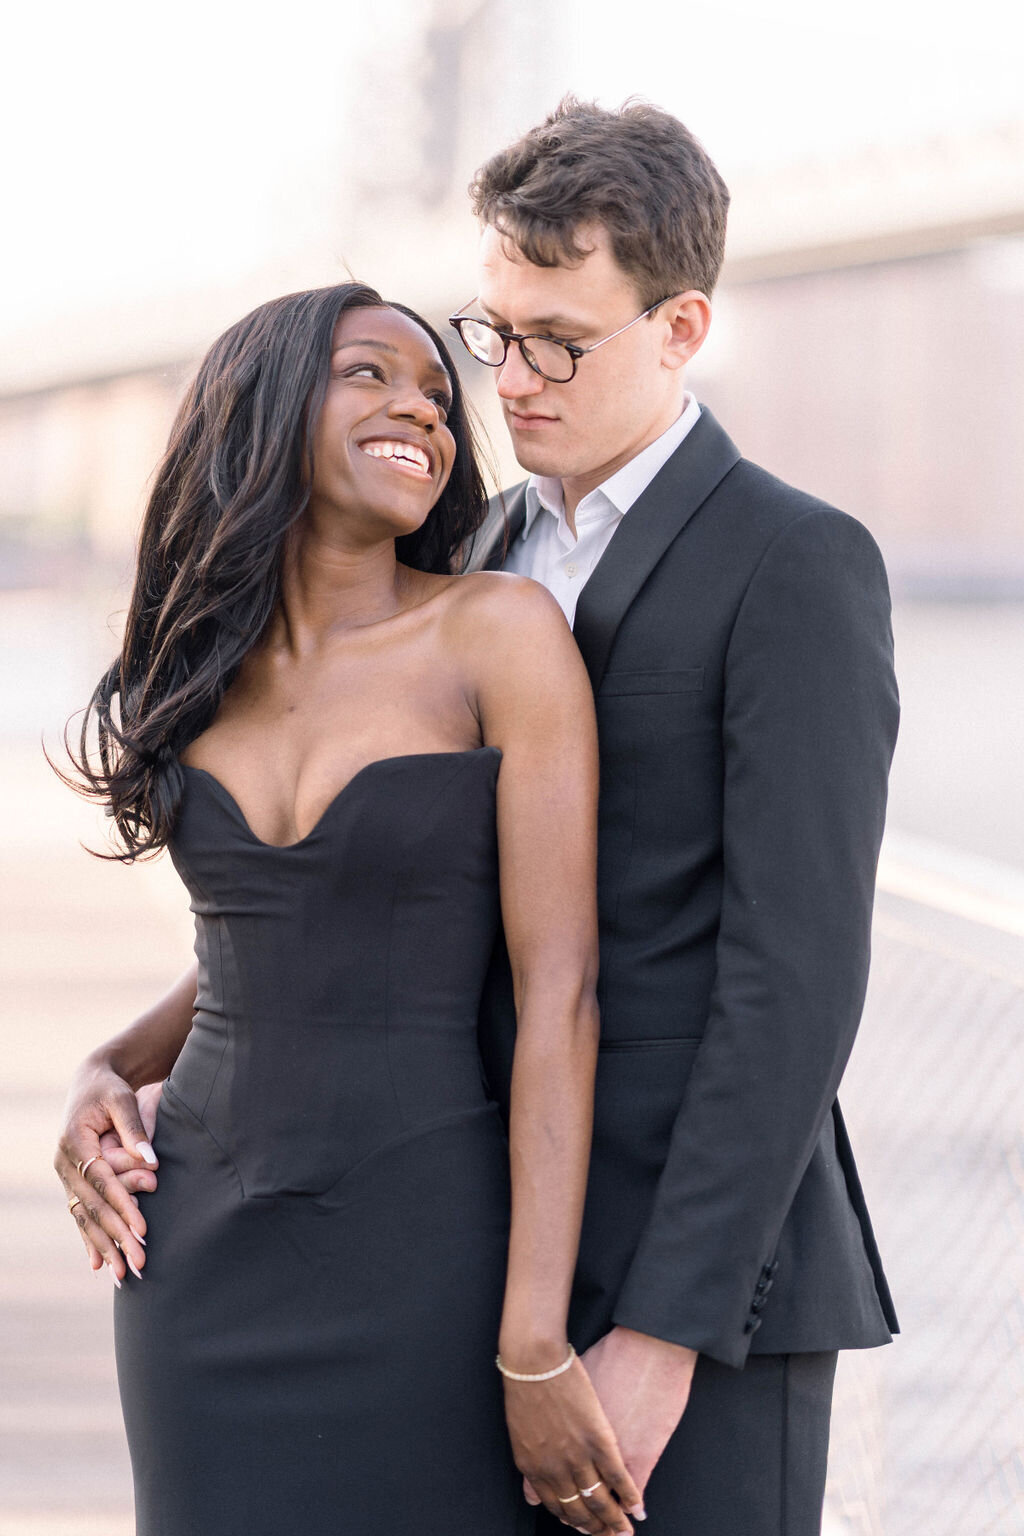 AllThingsJoyPhotography_TomMichelle_Engagement_HIGHRES-49